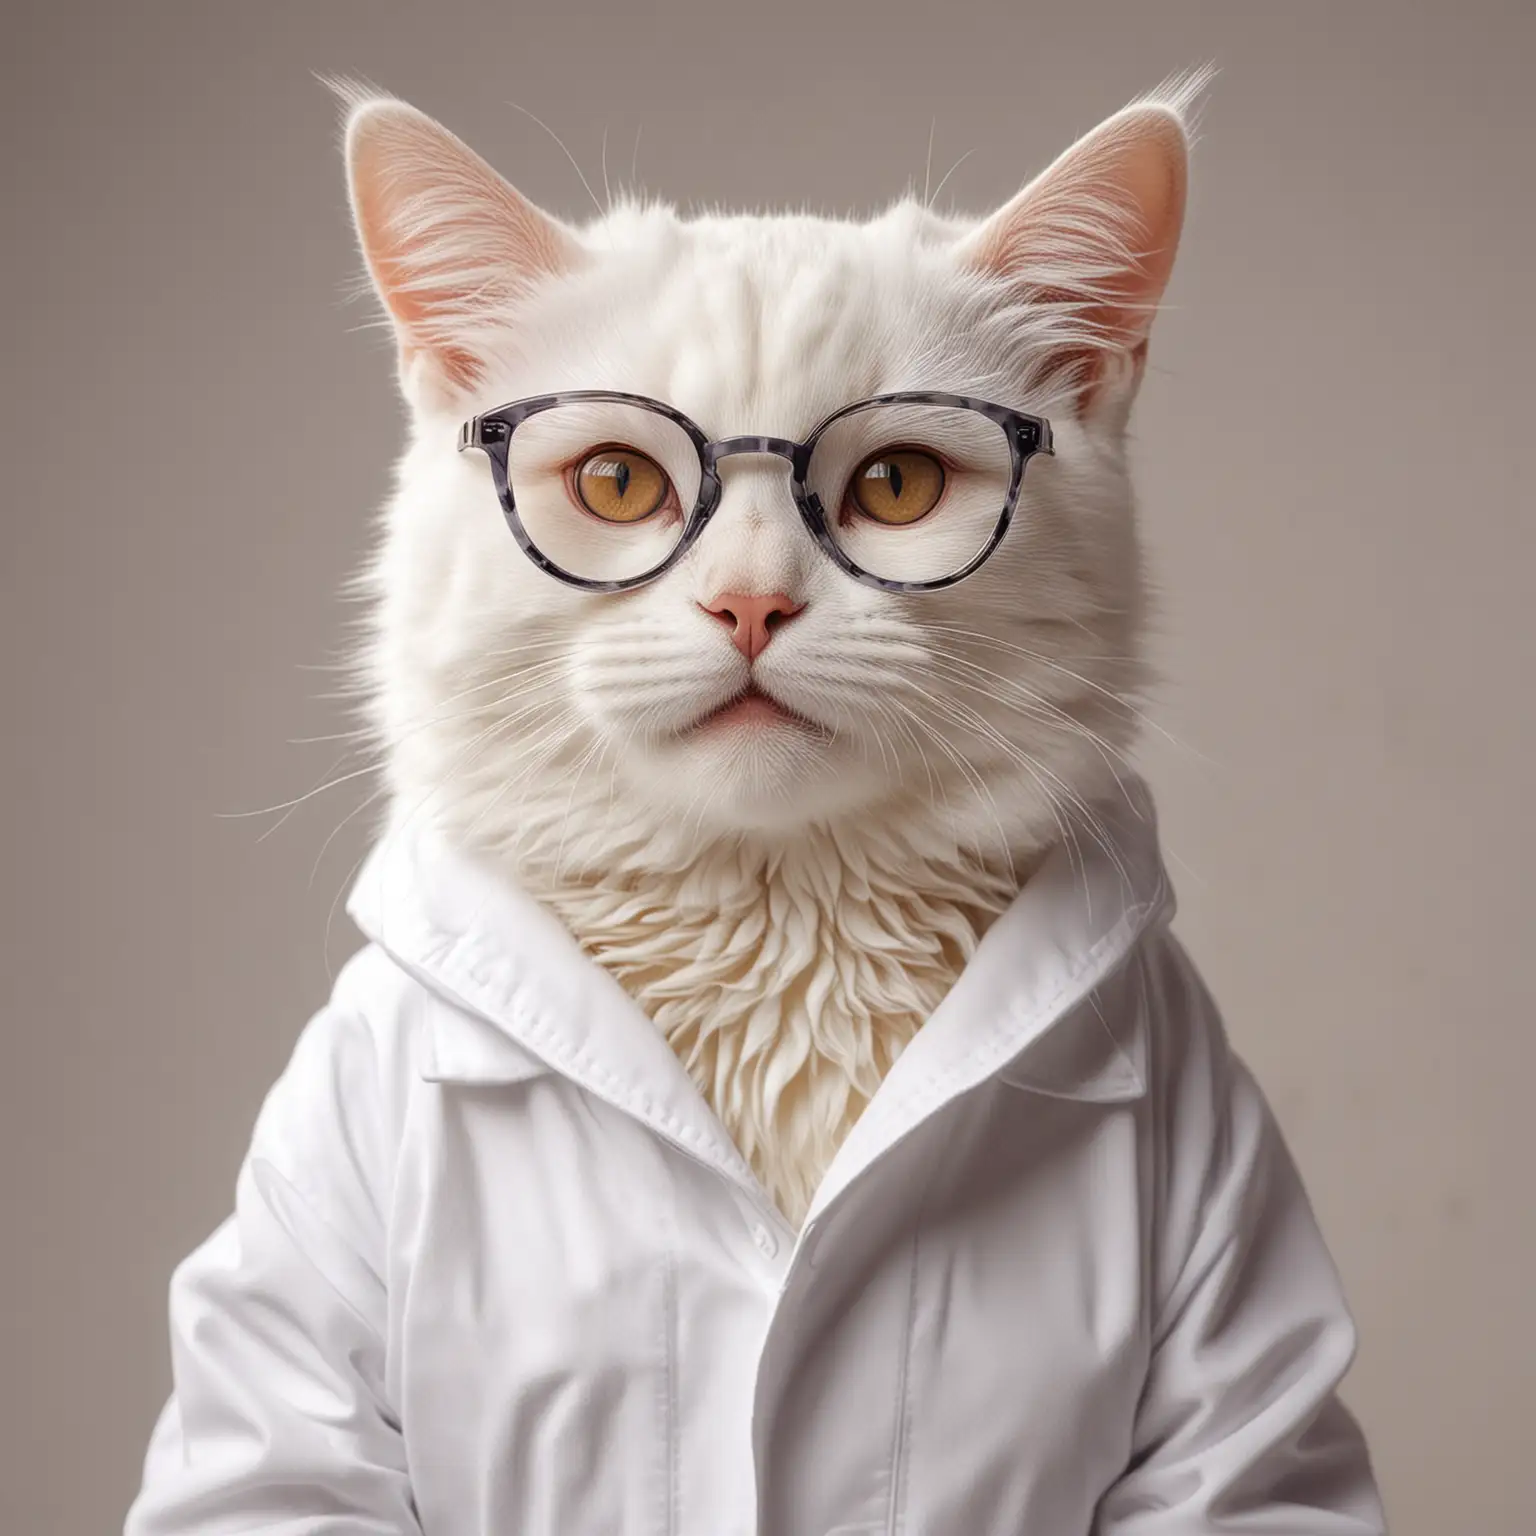 Smiling-Cat-in-White-Coat-with-Glasses